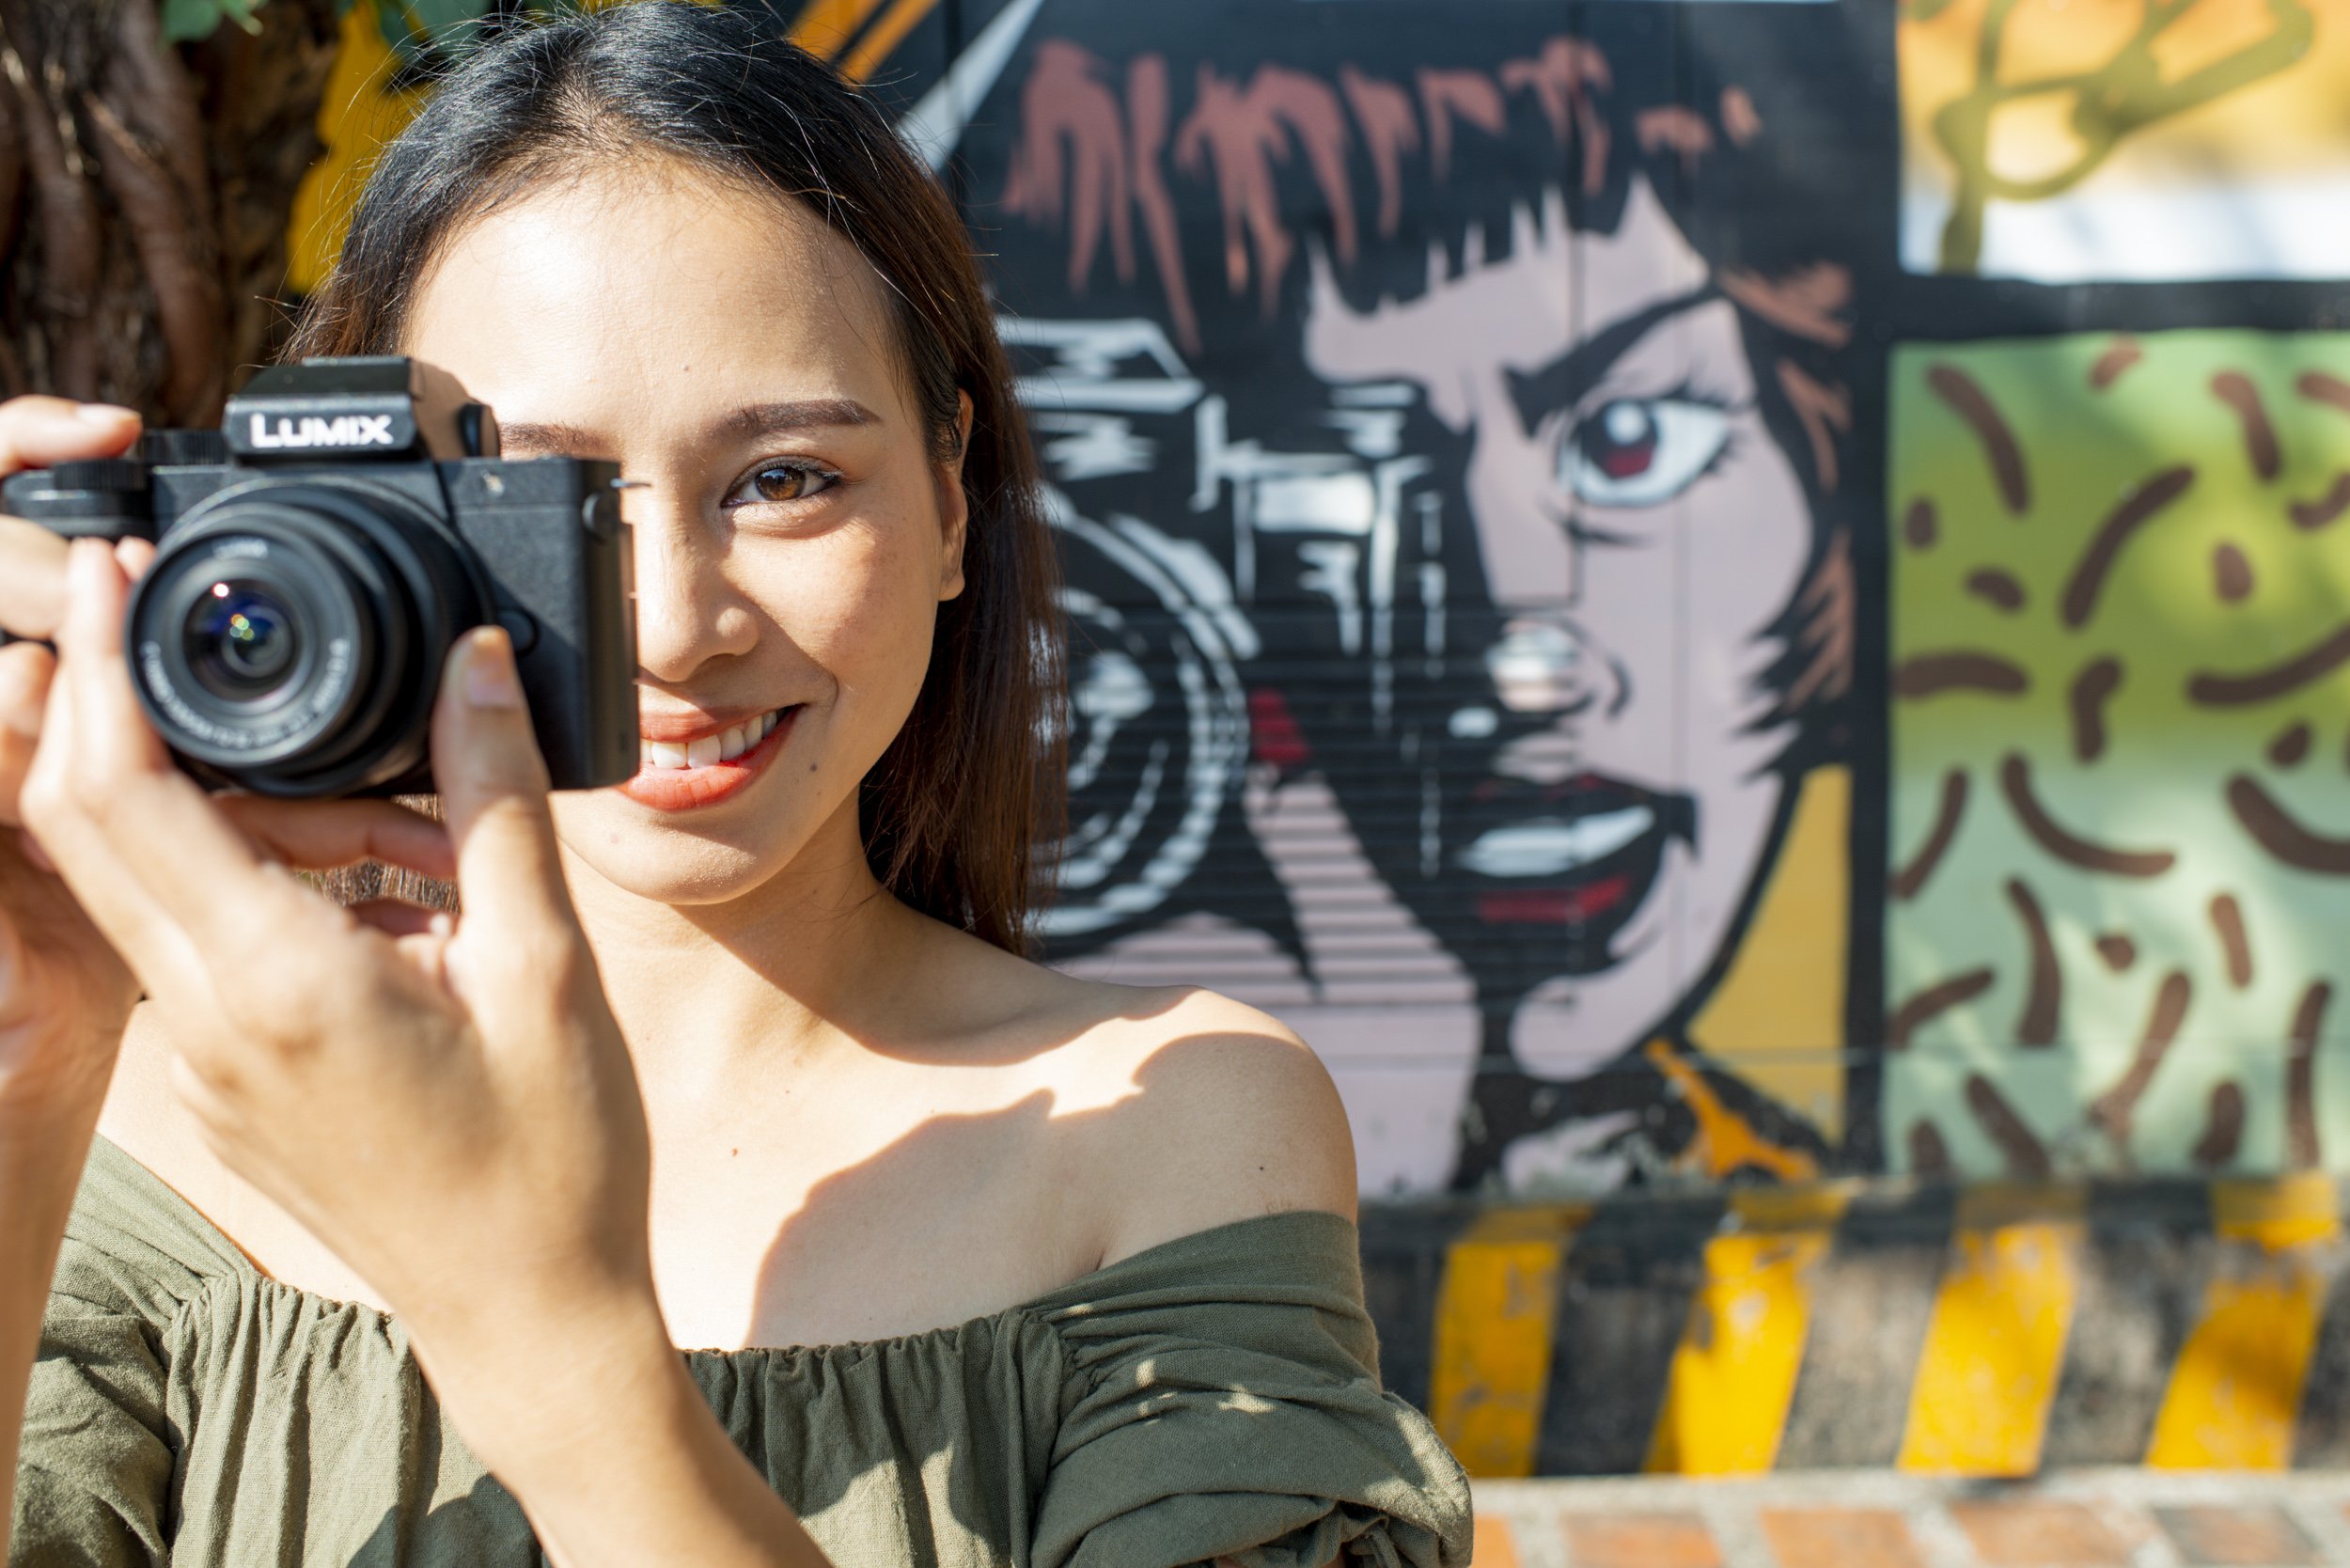 Asian woman taking a photo for photography terms